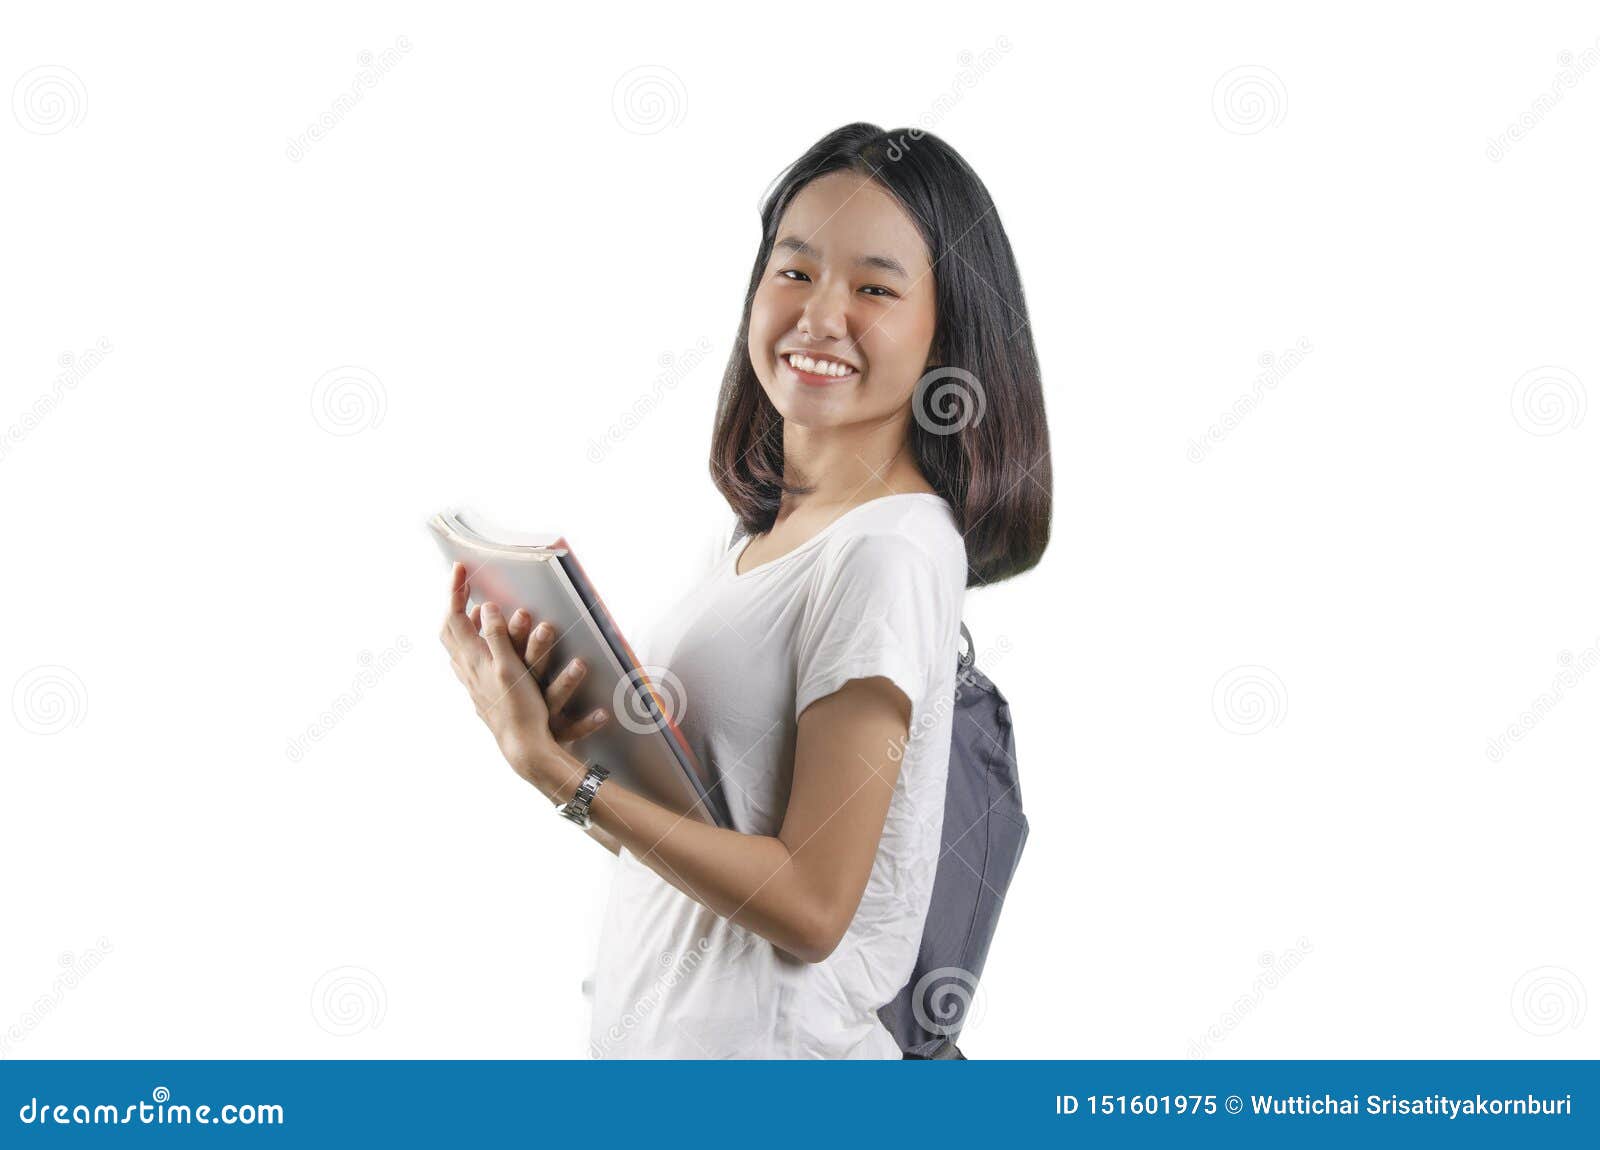 An Asian Young Student Lady With The White Backgroud Stock Image